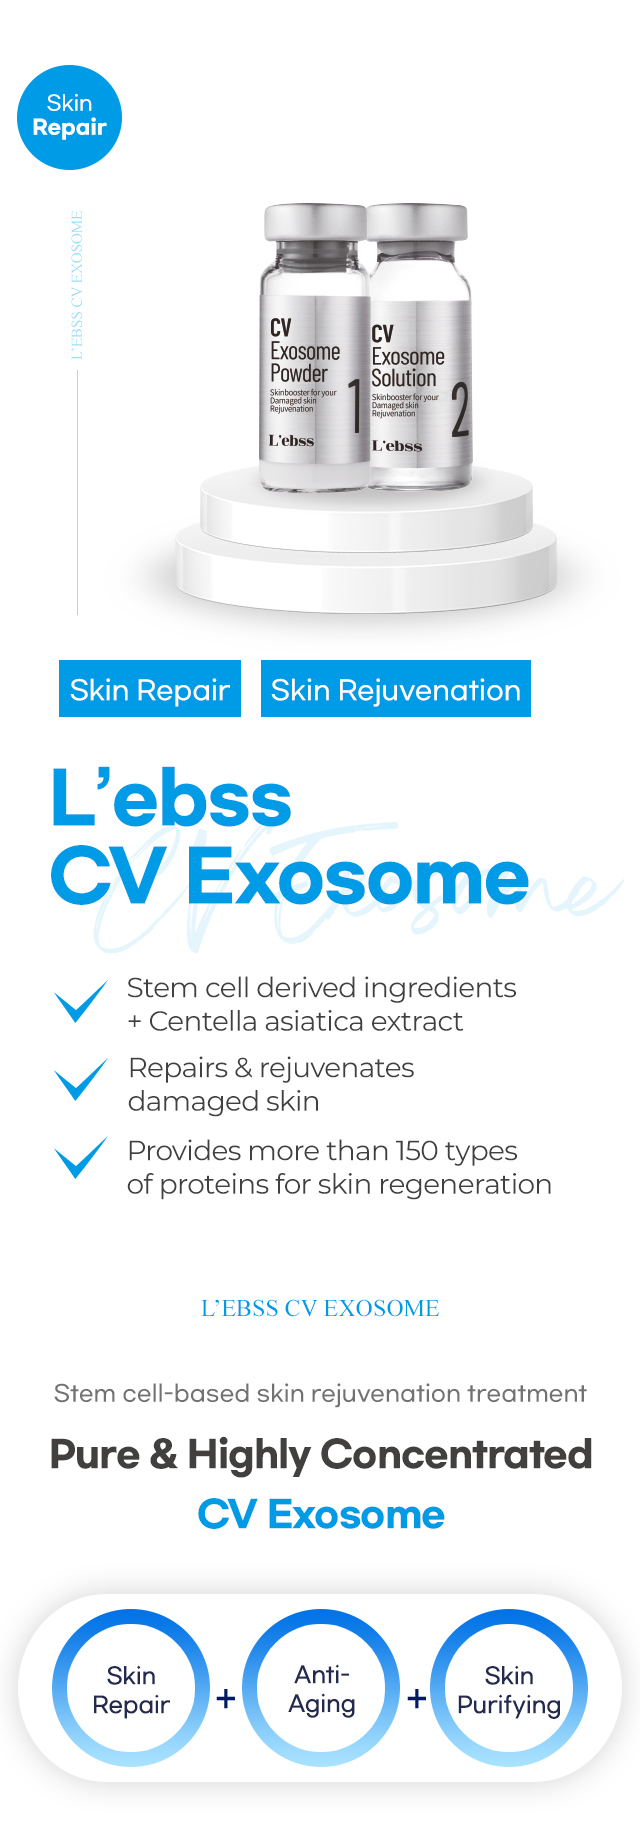 L'ebss CV Exosome MTS Microneedling skin booster descriptive page microneedling treatment for skin repair, and rejuvenation in Korea